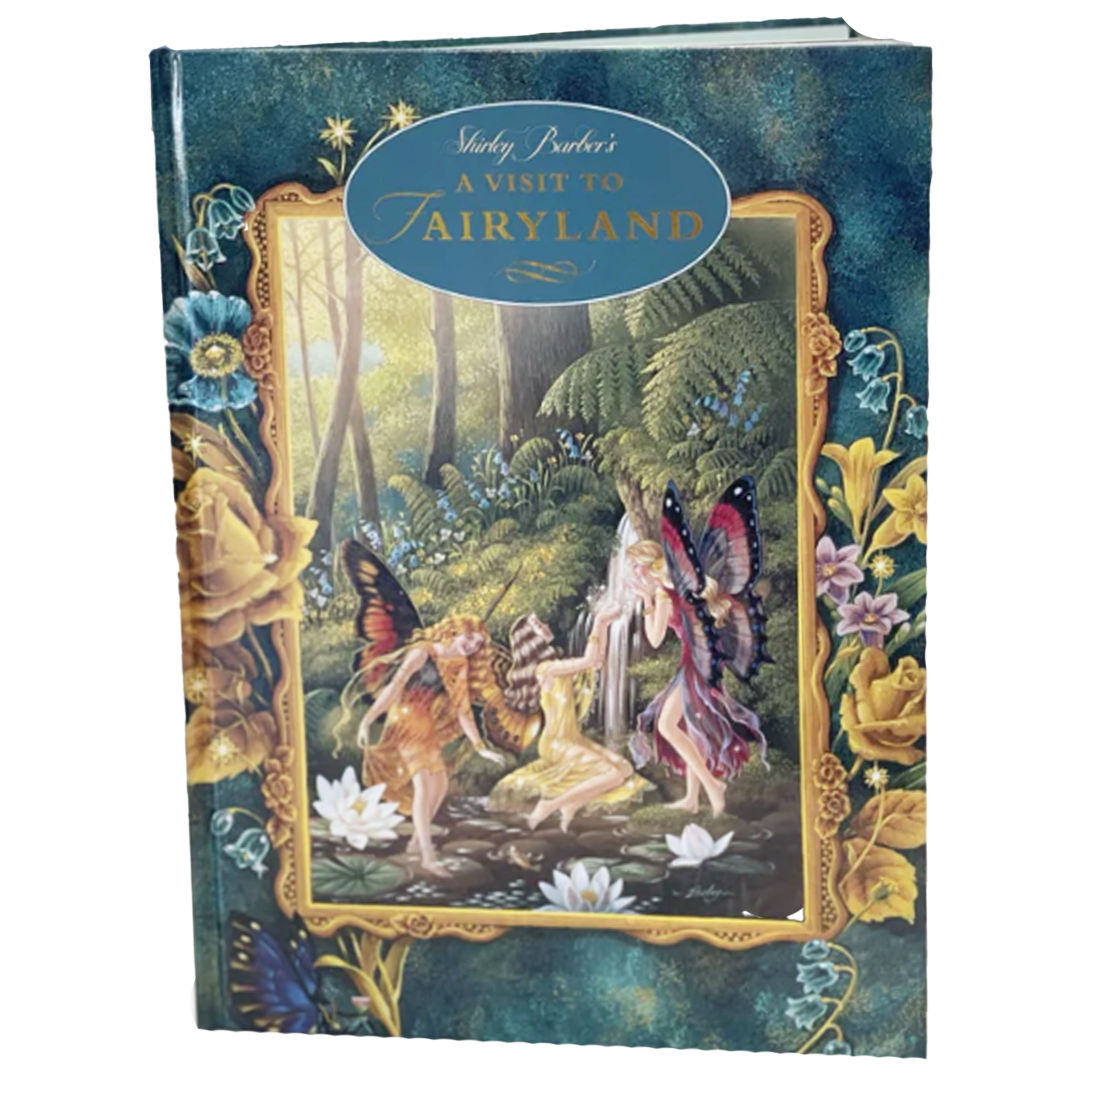 A Visit to Fairyland Hardback Book by Shirley Barber